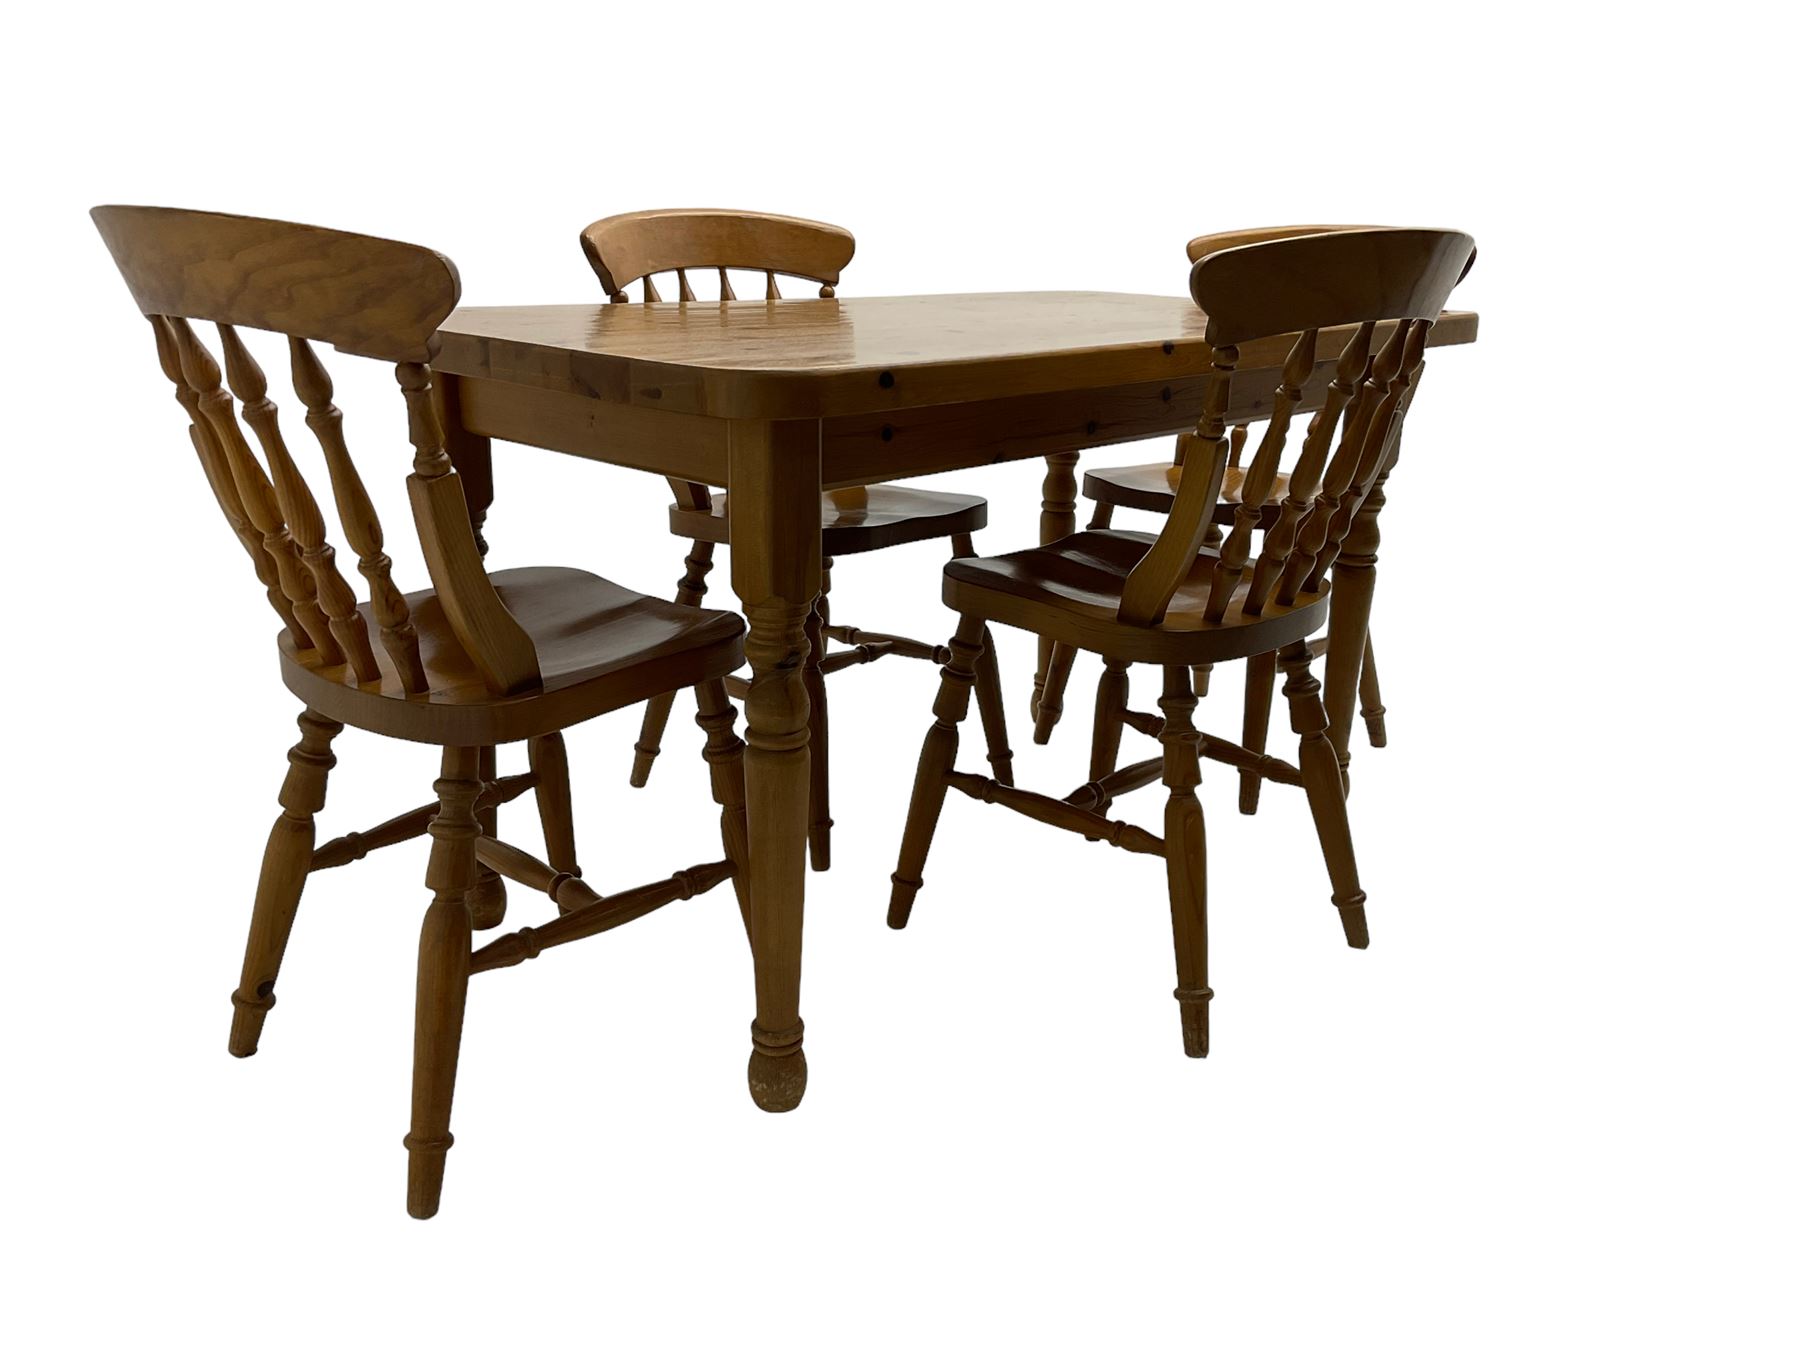 Traditional pine dining table - Image 3 of 6